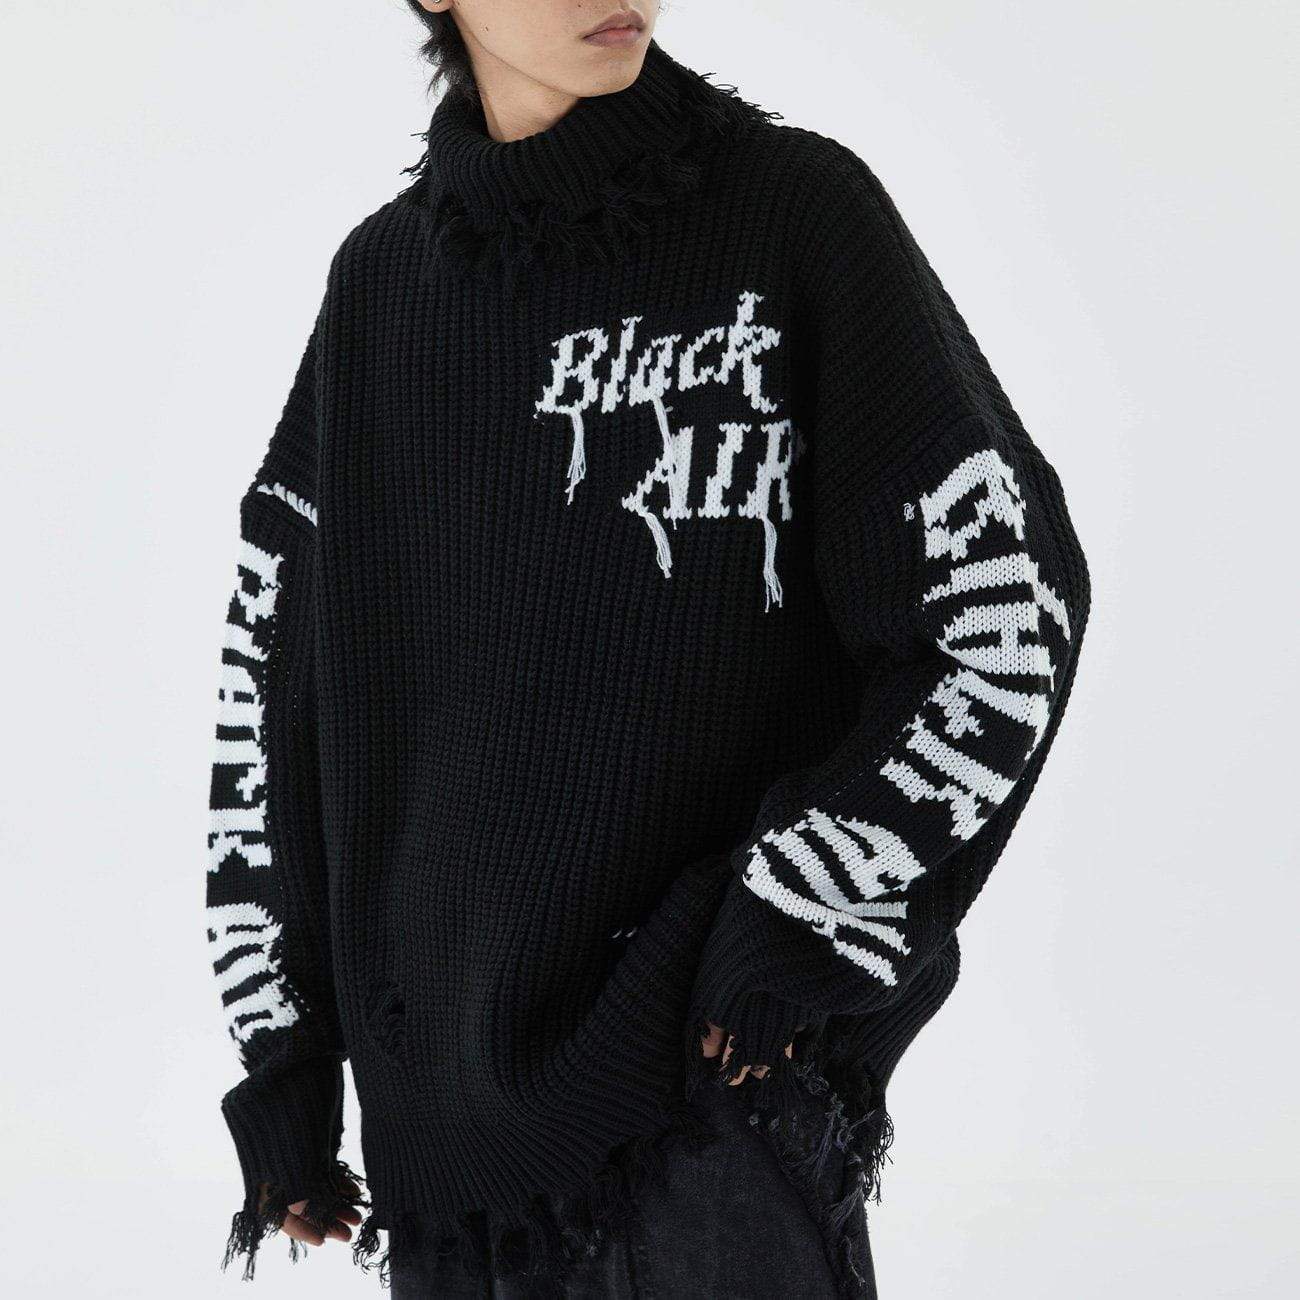 Ripped Embroidery Turtleneck Sweater Streetwear Brand Techwear Combat Tactical YUGEN THEORY